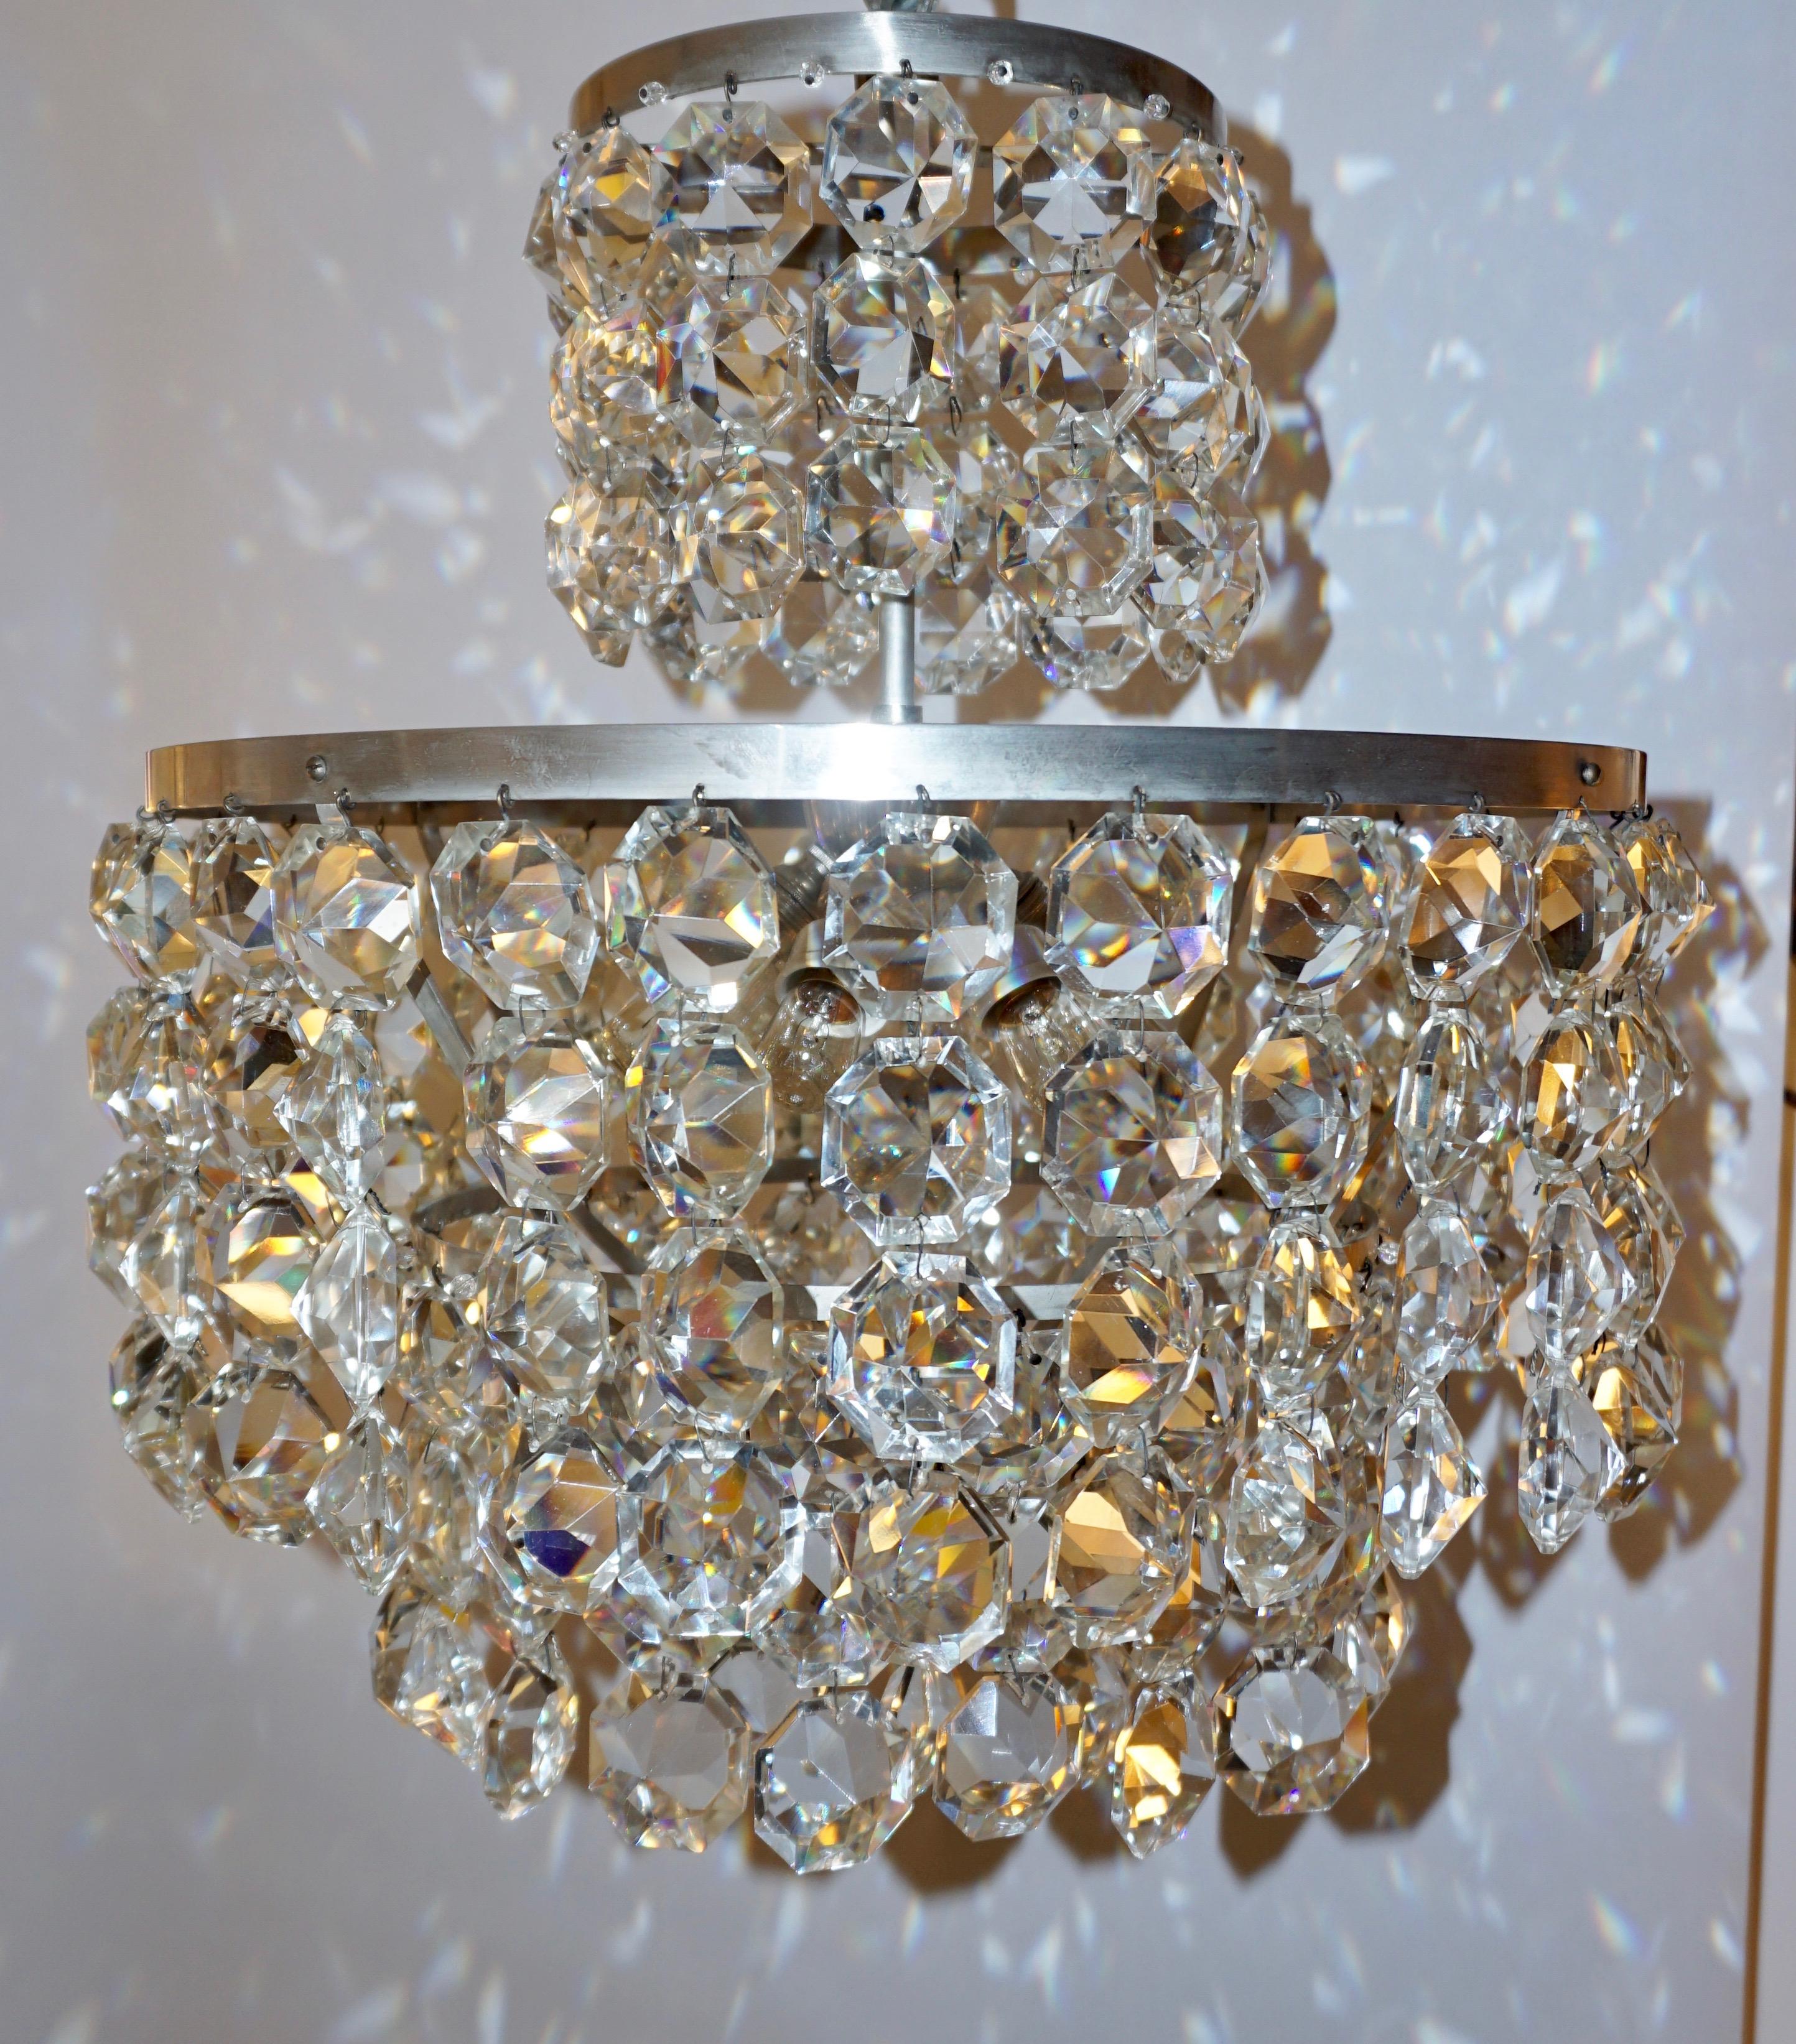 Ceramic 1950s Italian Vintage Satin Chrome and Clear Crystal Murano Glass Chandelier For Sale